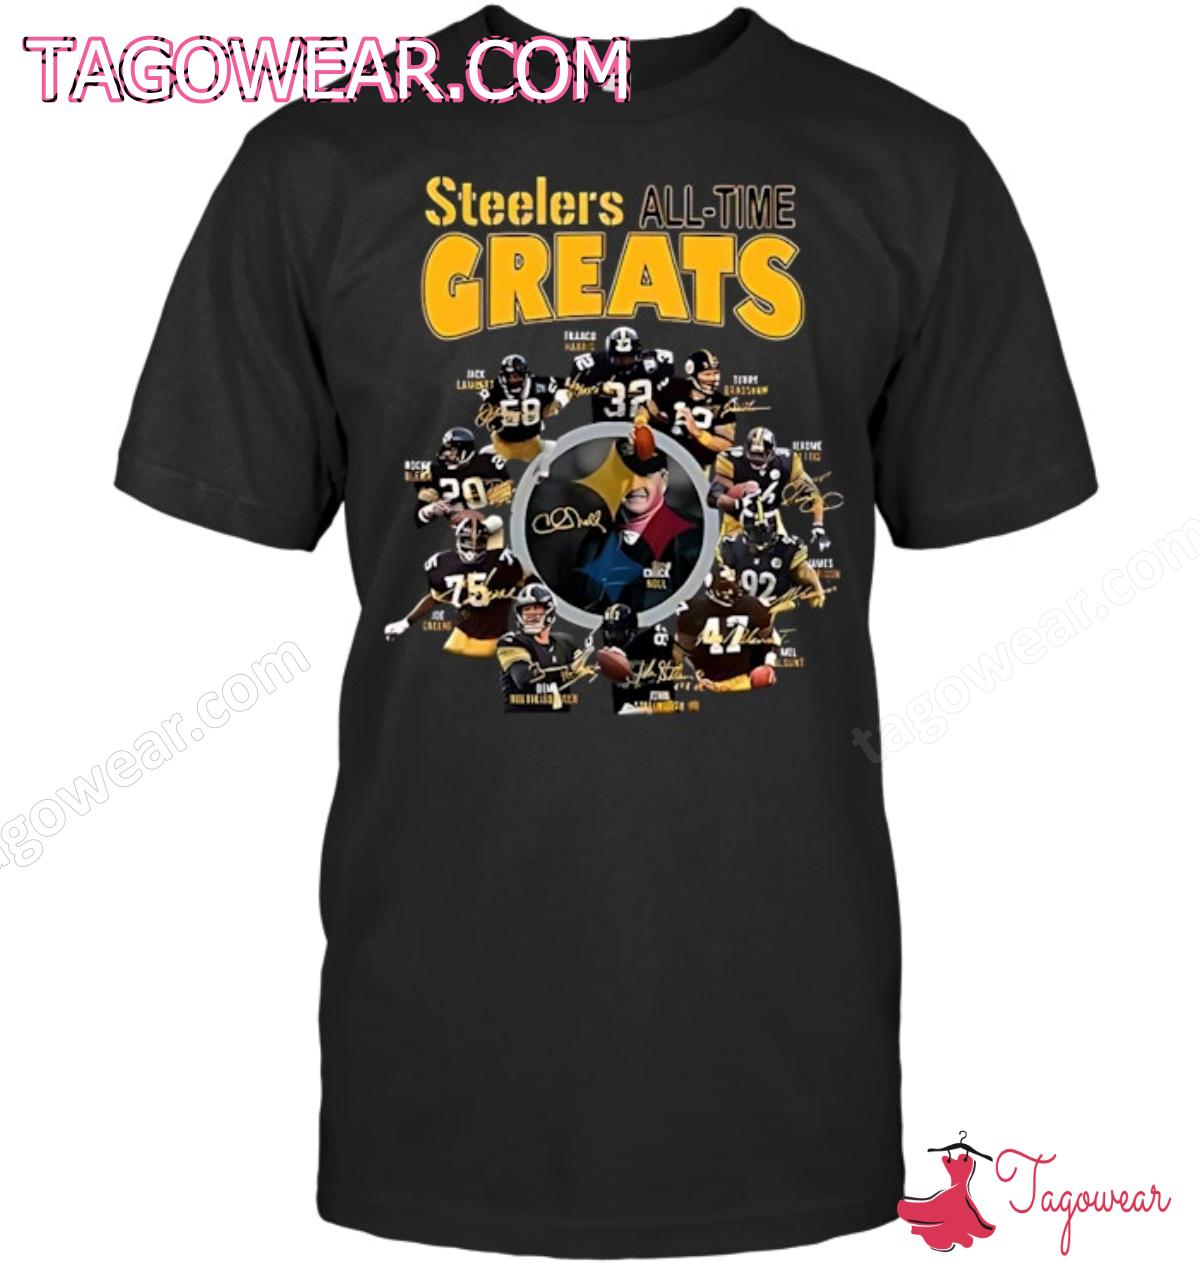 Pittsburgh Steelers All-time Greats Signatures Shirt, Sweatshirt a